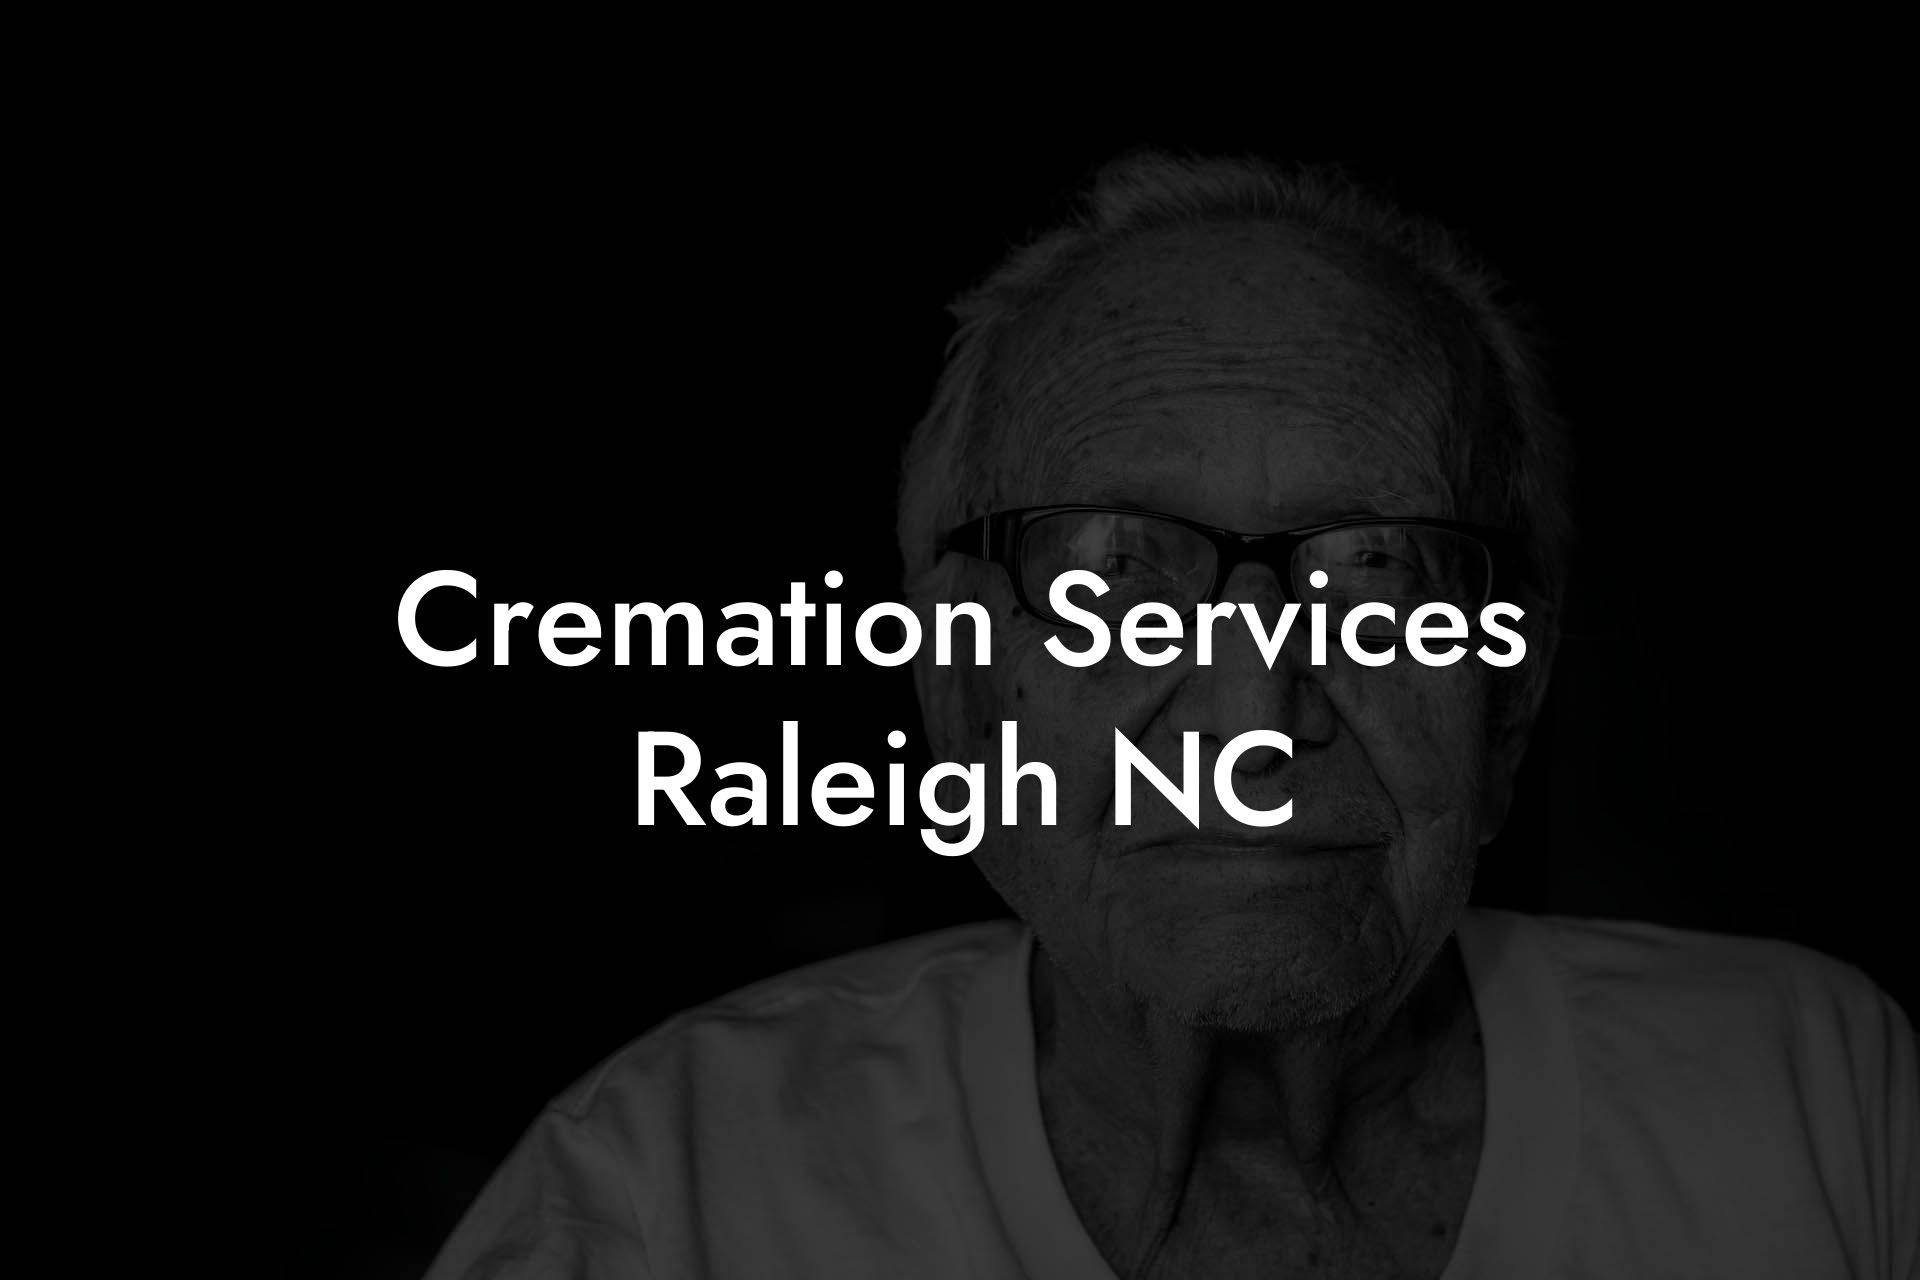 Cremation Services Raleigh NC